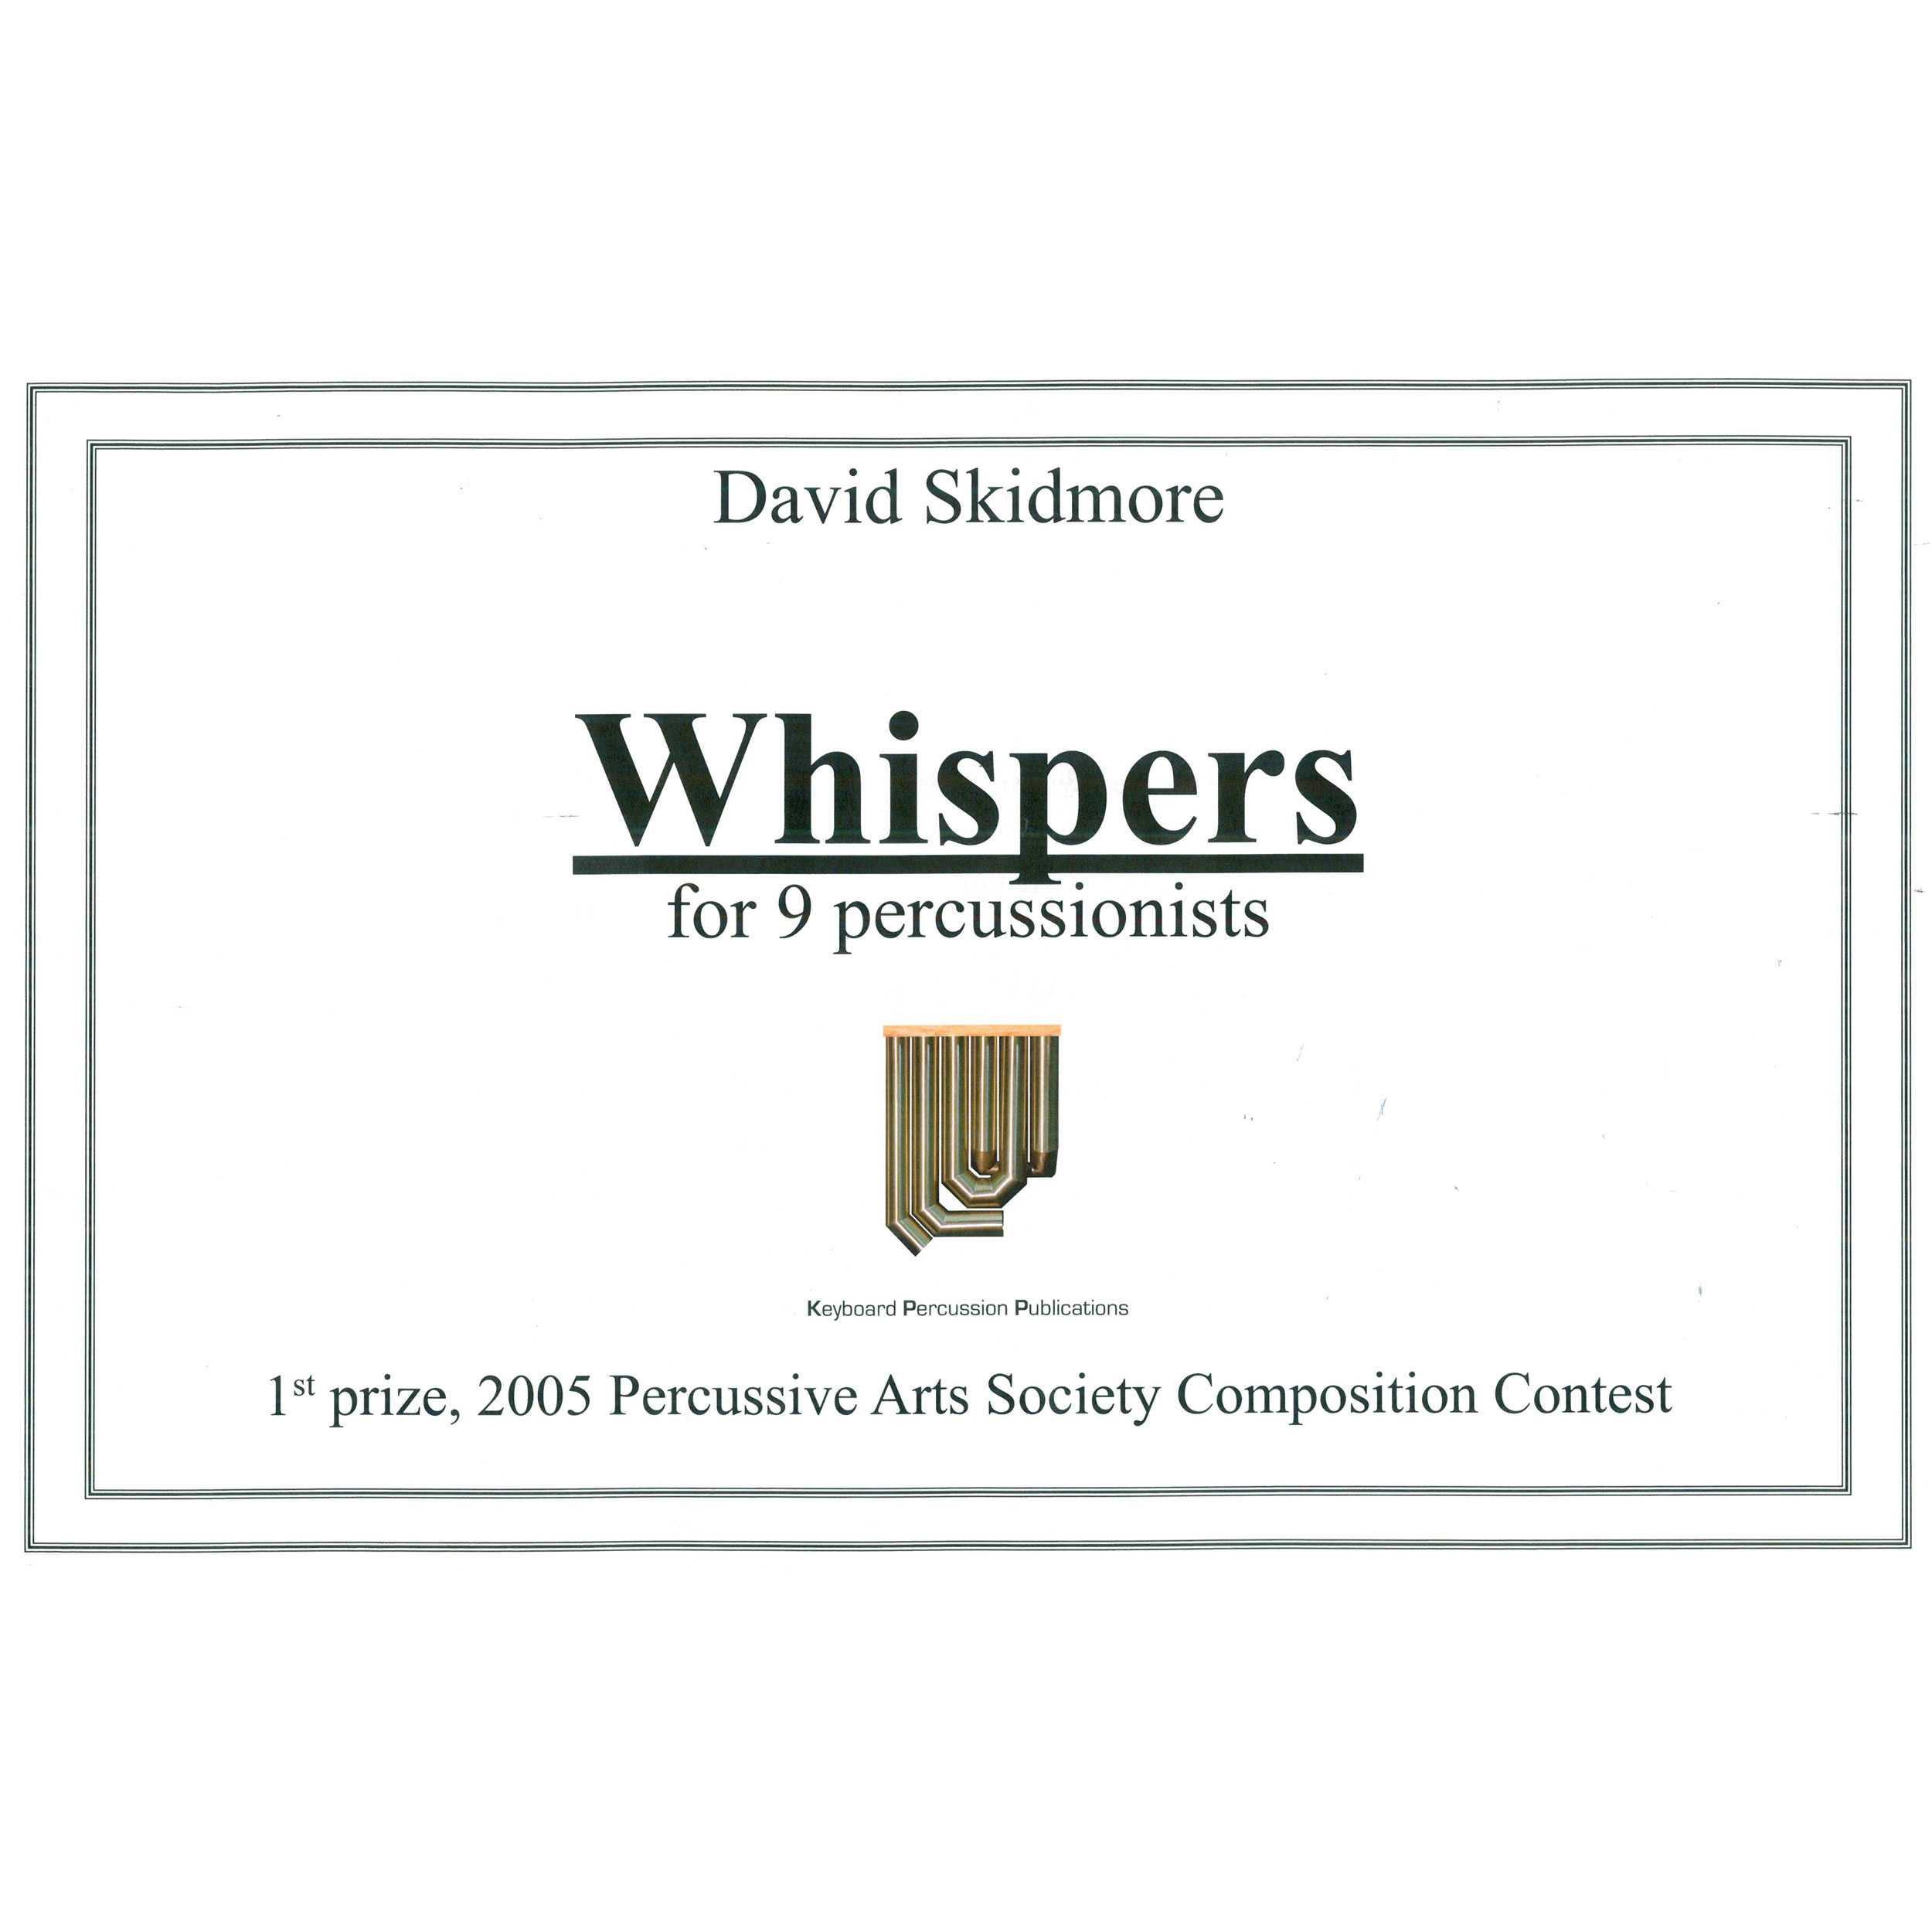 Whispers 2 by David Skidmore